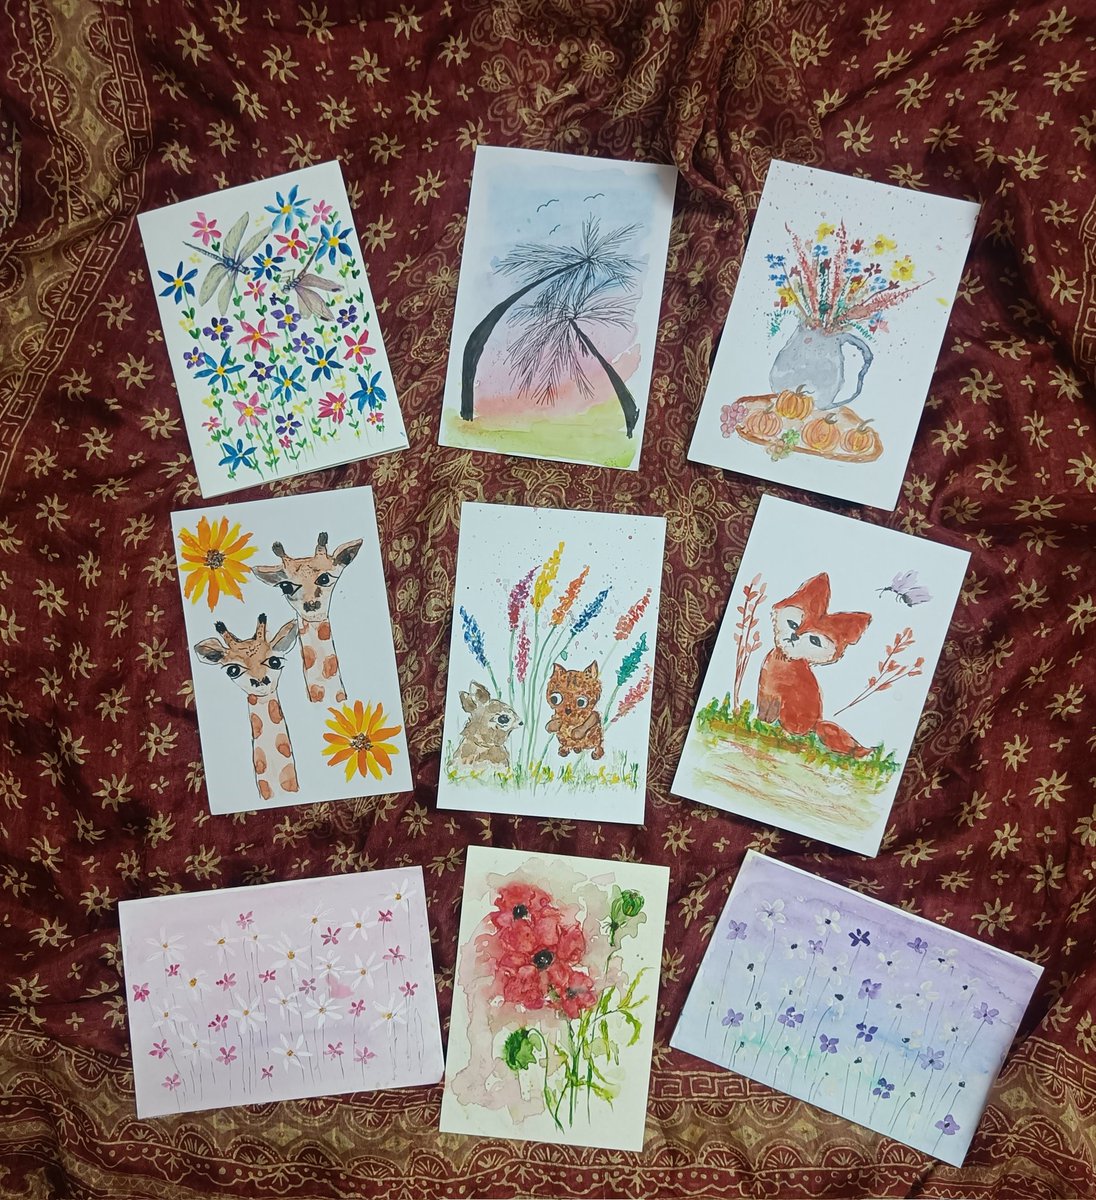 These  handpainted money envelopes and greeting cards are up for bundle sale. DM for details. #ArtbyTee #clearancesale #holisale #OnSale #Repost